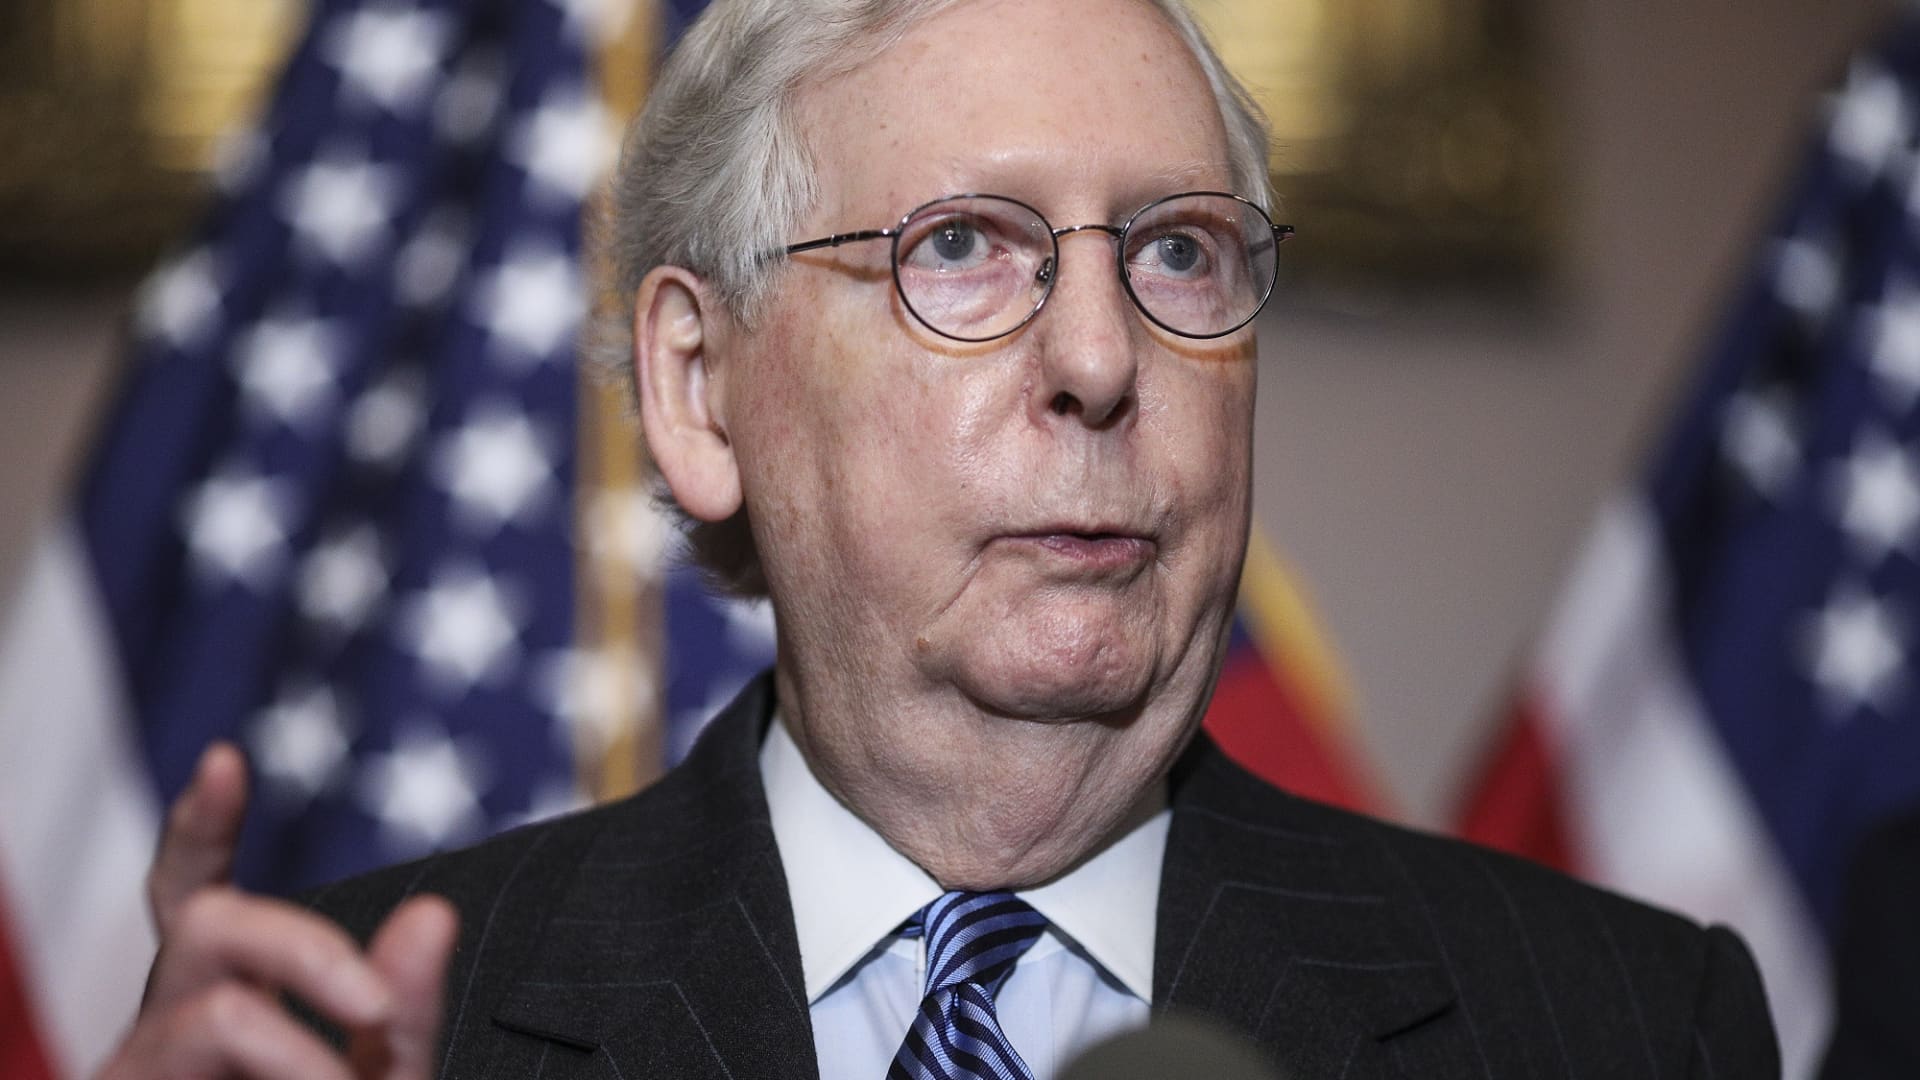 Senate Majority Leader Mitch McConnell (R-KY) speaks at a news conference with other Senate Republicans at the U.S. Capitol on December 15, 2020 in Washington, DC.